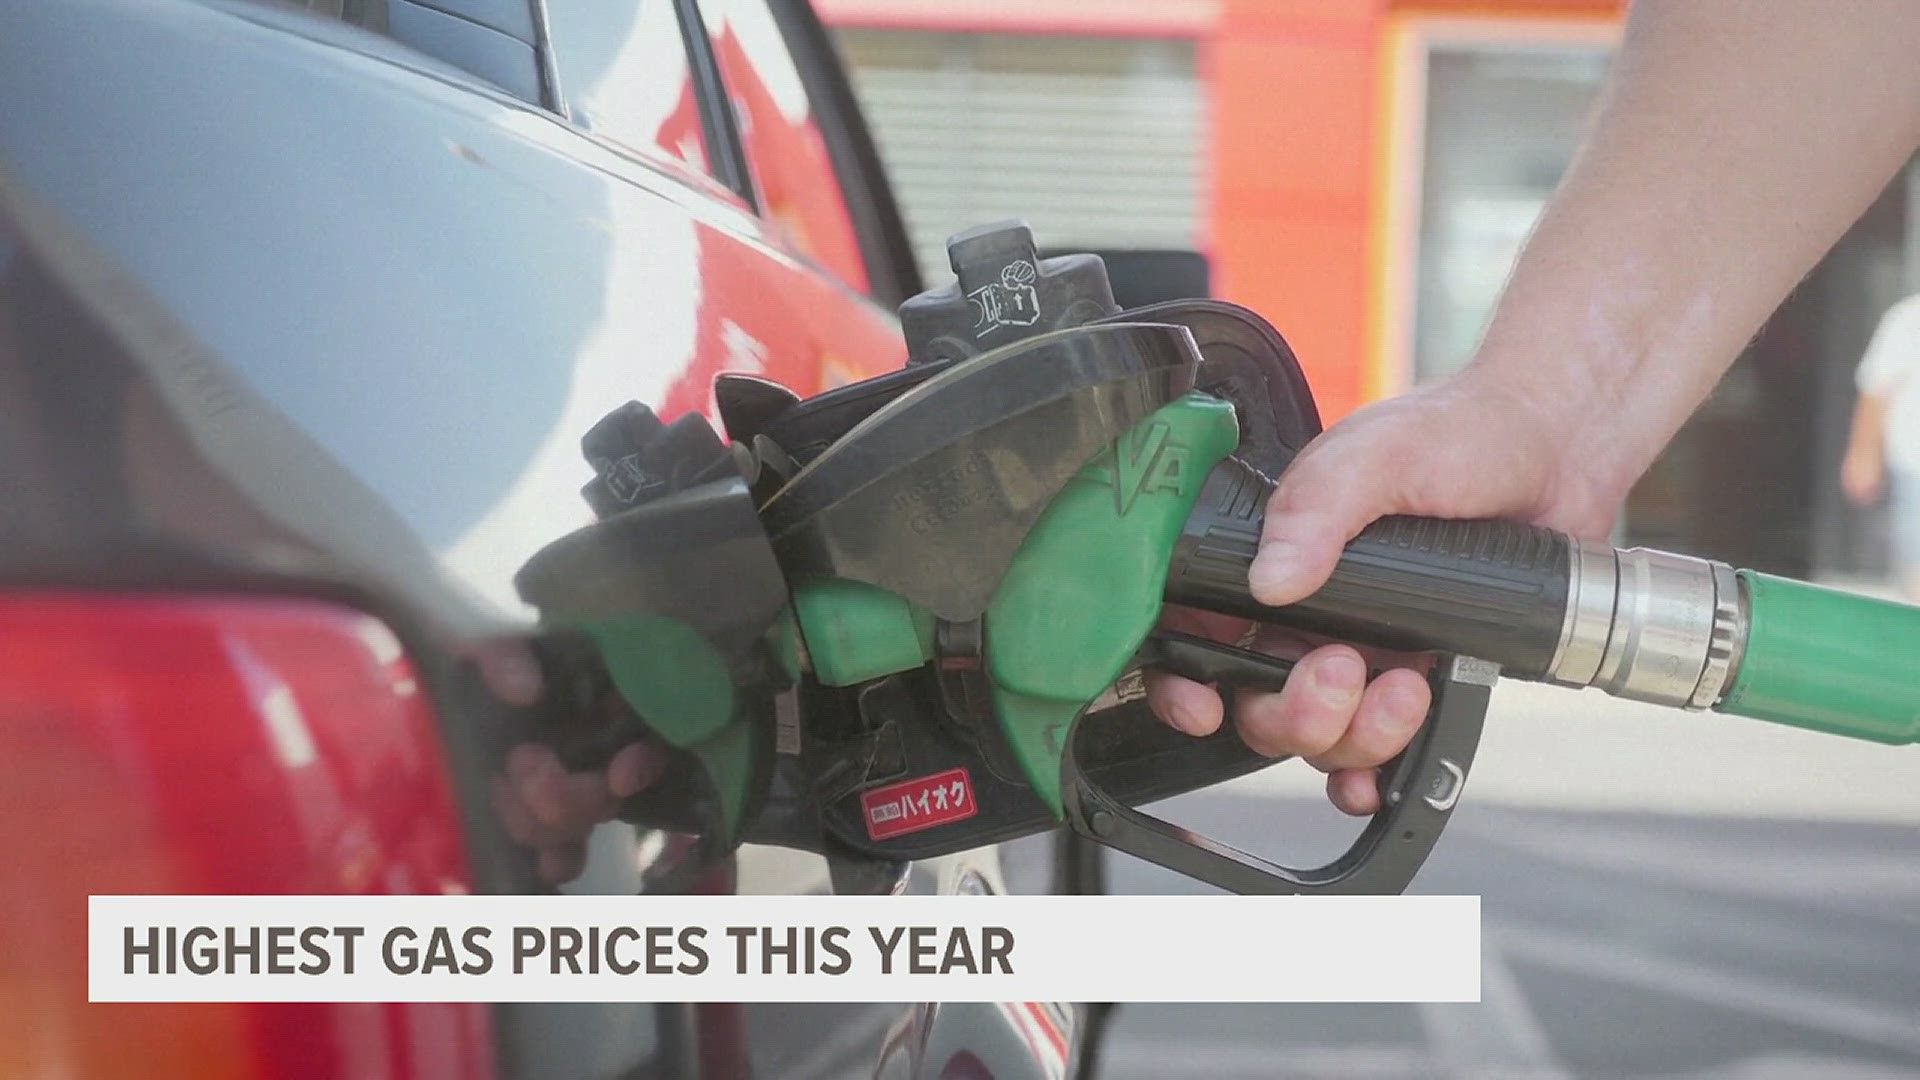 Driving is the preferred method of travel this weekend according to Triple A, but gas prices are at an all-time high nationally.